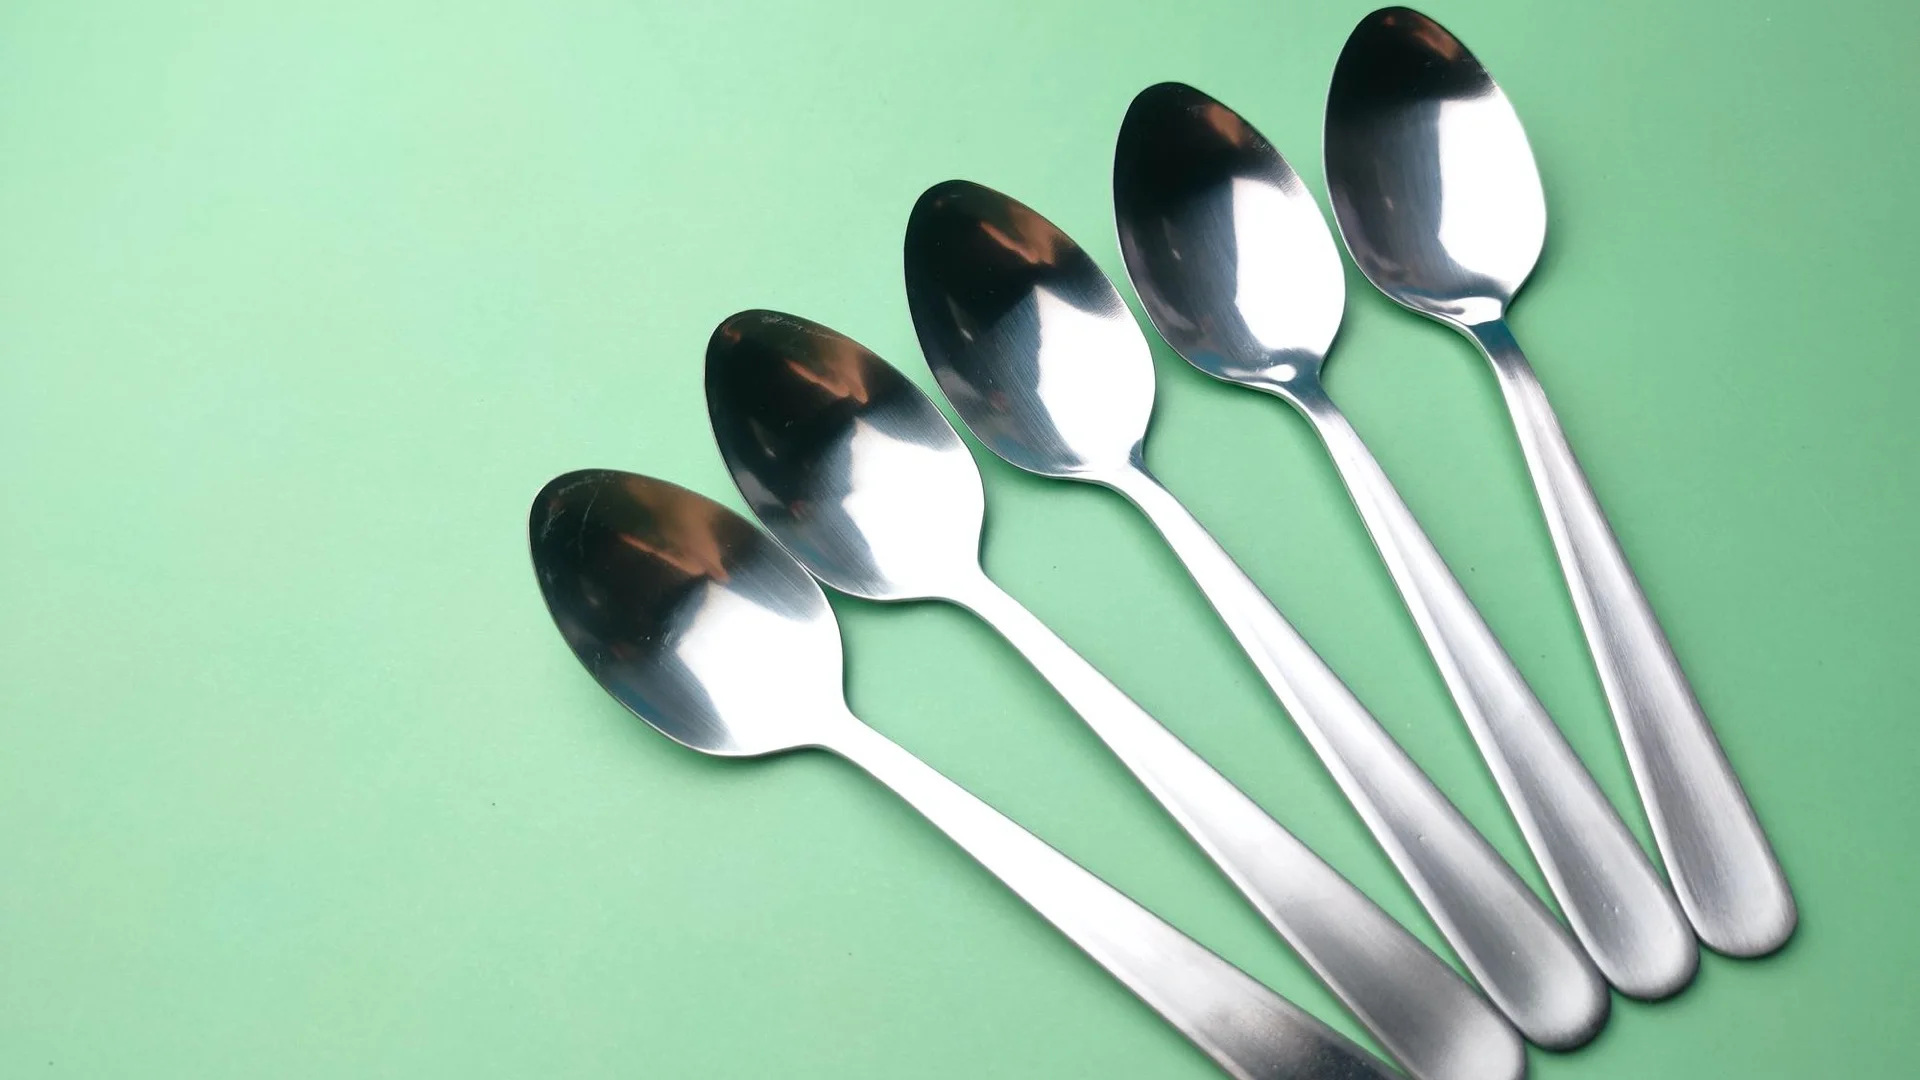 What is a Teaspoon in Cooking Terms?